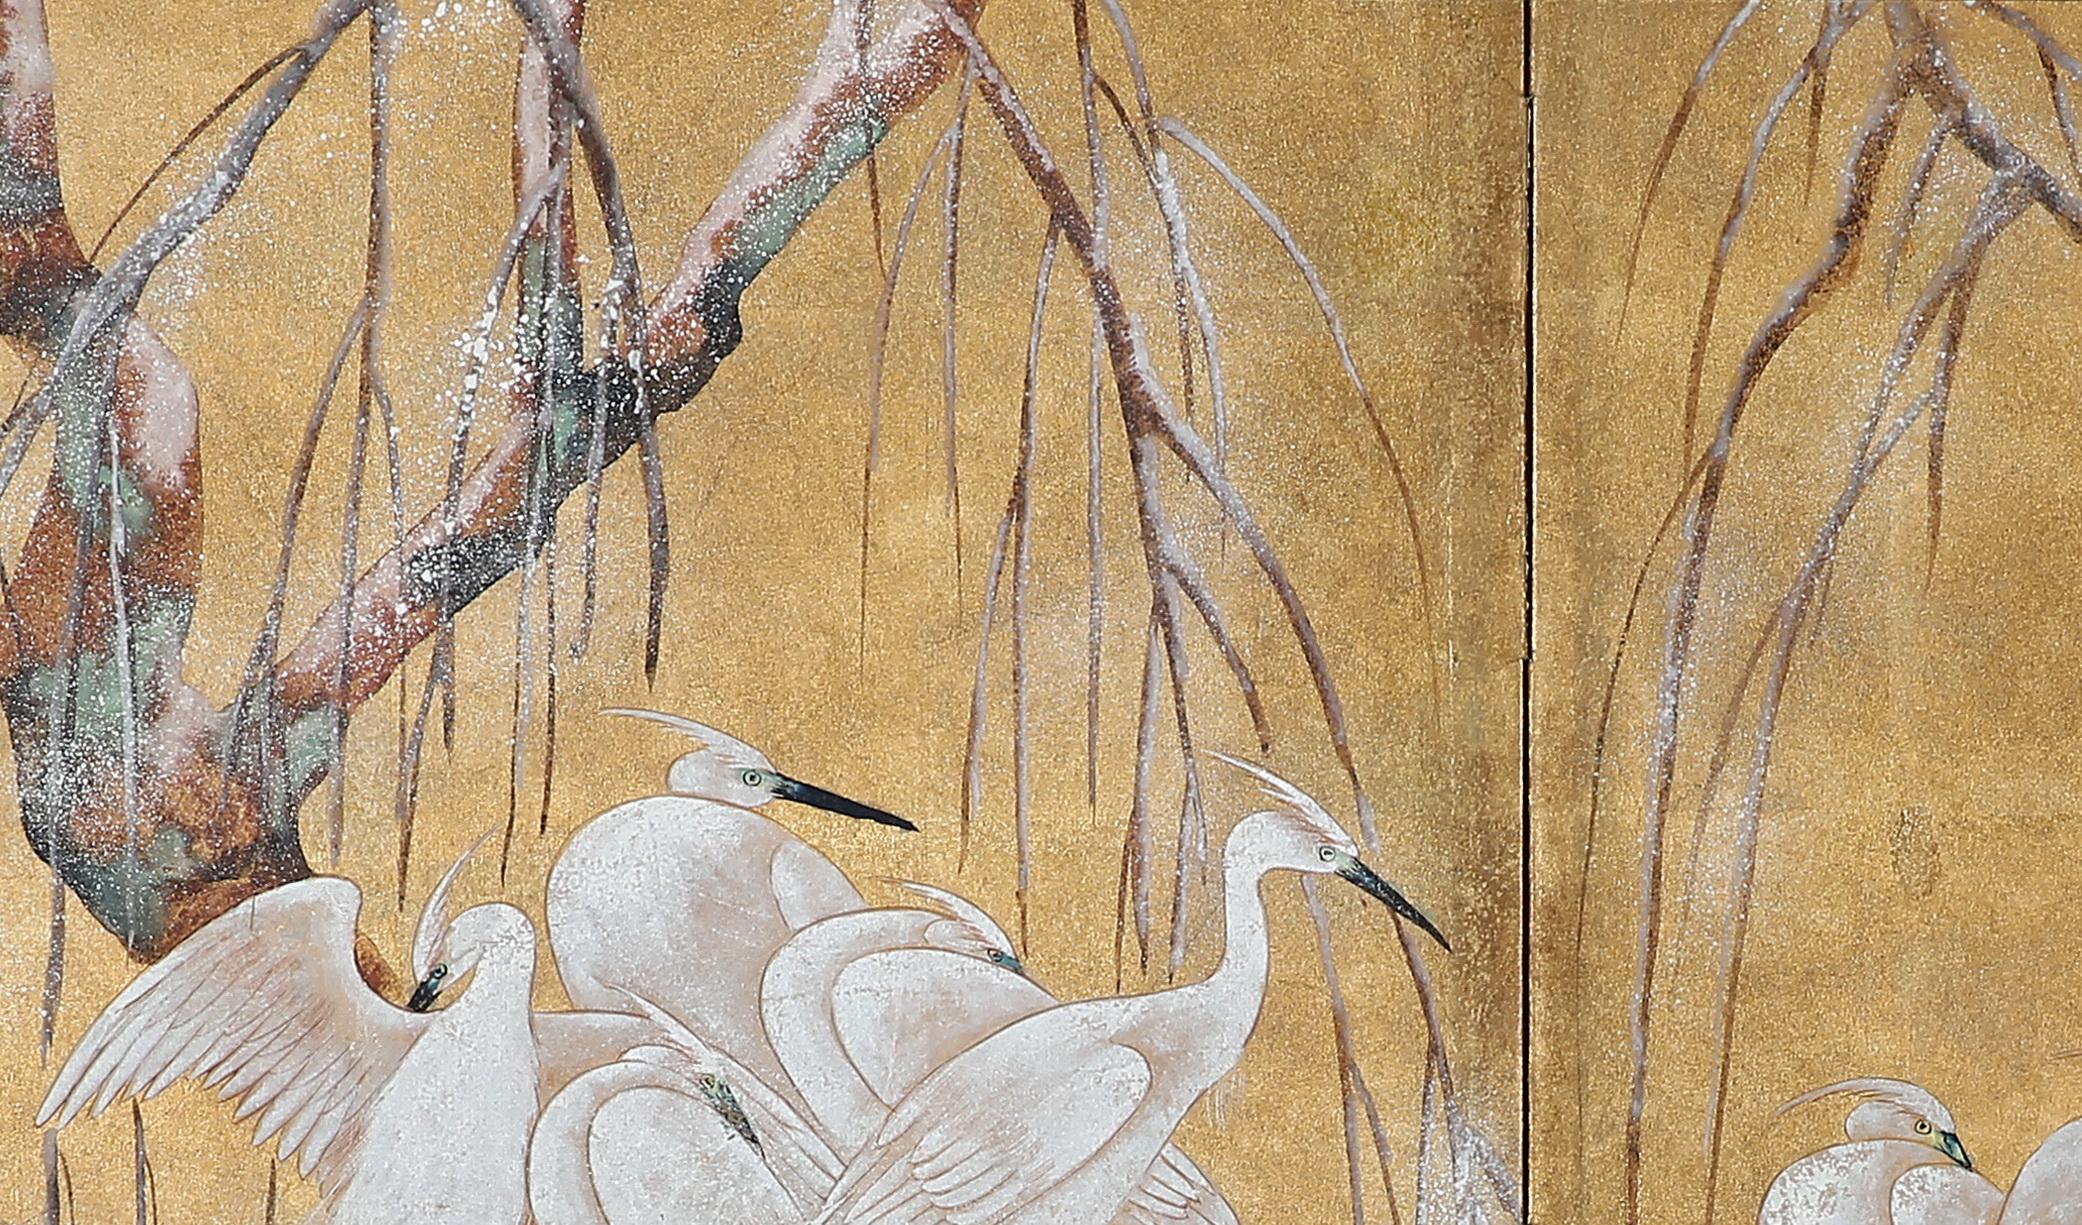 The egrets by the trees painting of this two-panel screen is hand-painted in watercolor, on squares of gold leaf which are applied by hand to the paper base over carefully jointed wooden lattice frames. Lacquer rails are then applied to the